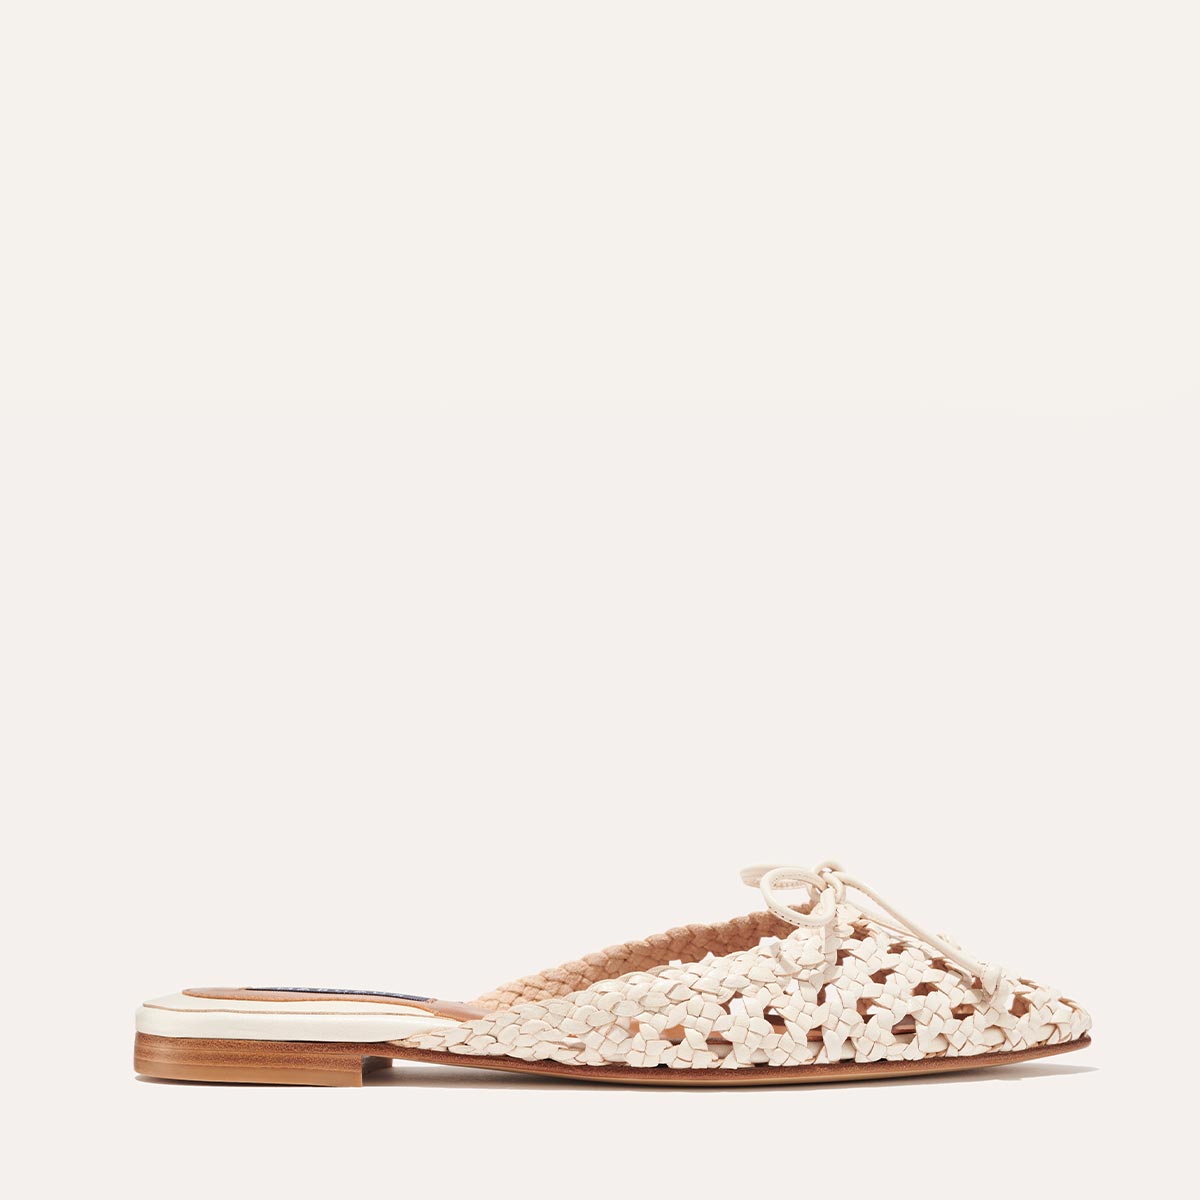 The Ballet Mule - White Woven Leather